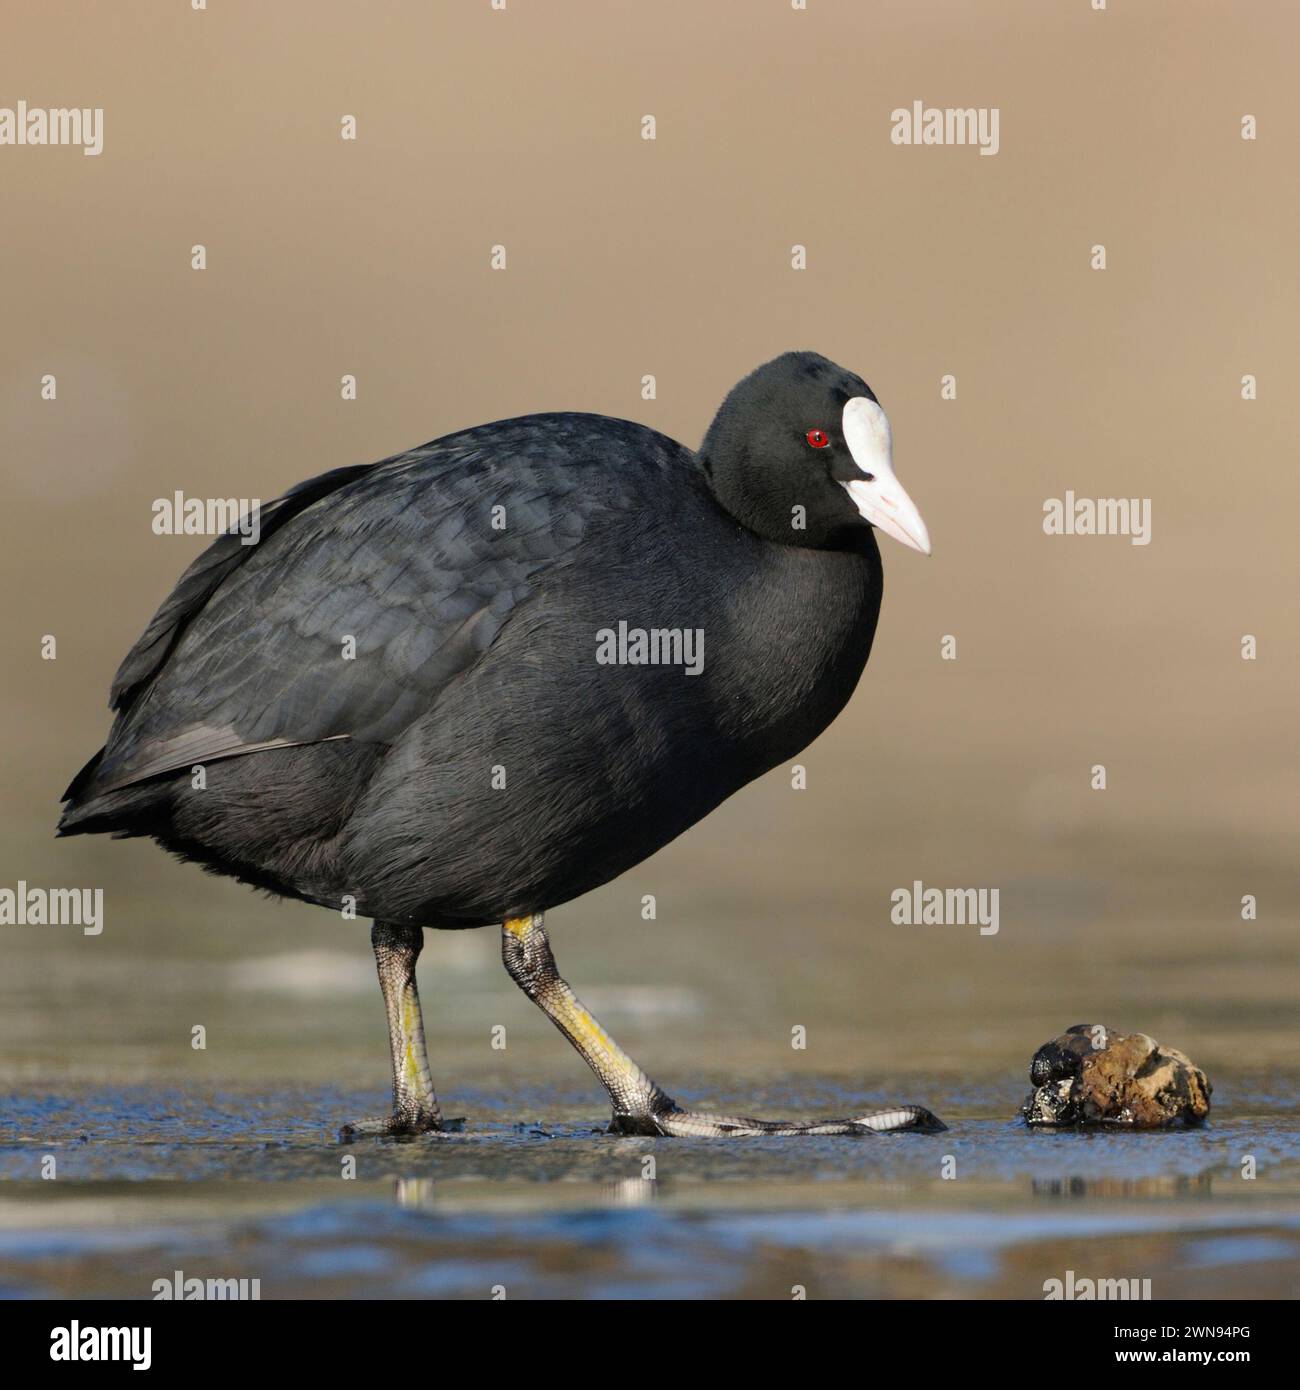 Black Coot / Eurasian Coot ( Fulica atra ) standing on ice in front of a zebra mussel, full body, length, side view, common, wide spreaded waterbird, Stock Photo